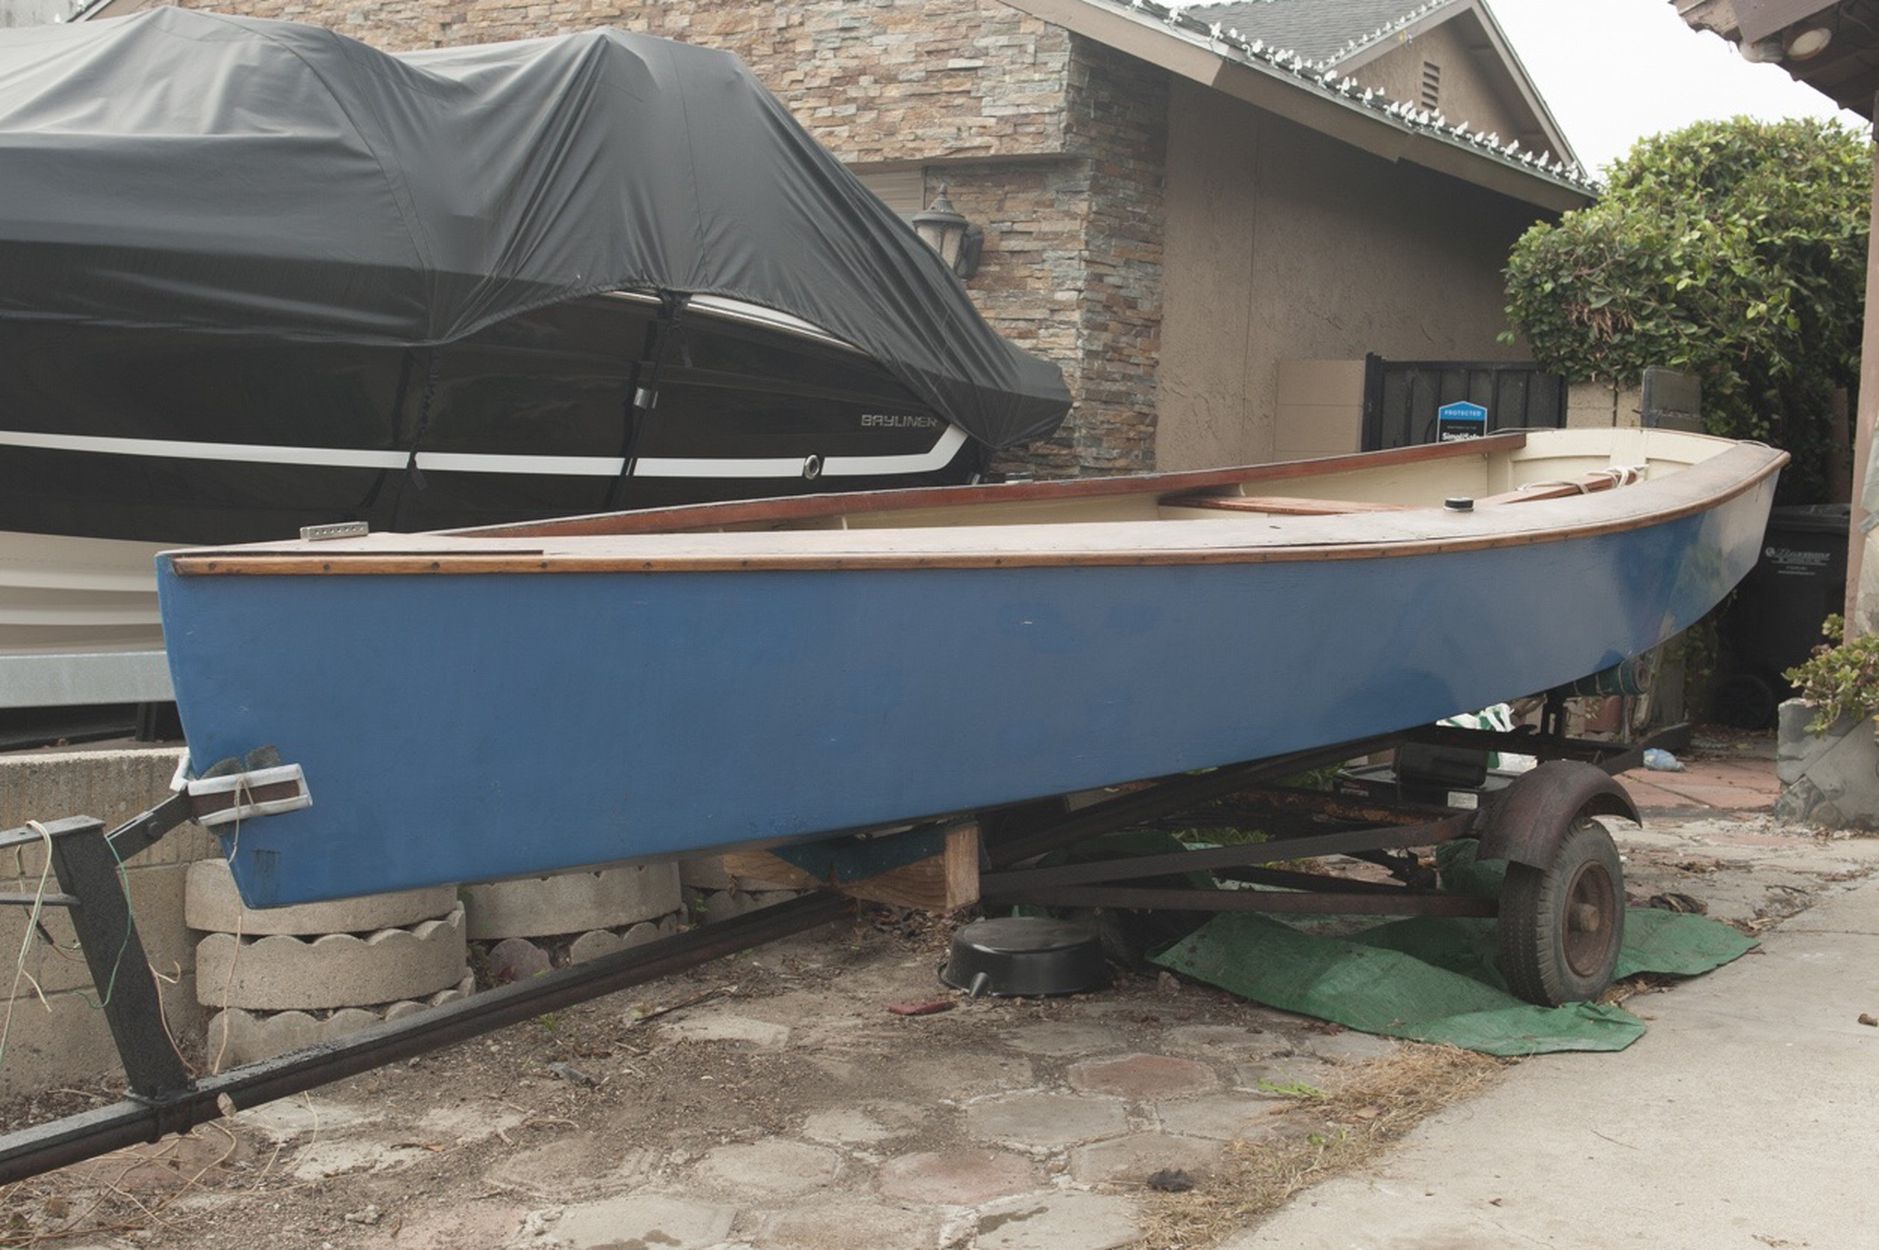 15 foot Windmill Class Sailboat ForSale or Trade